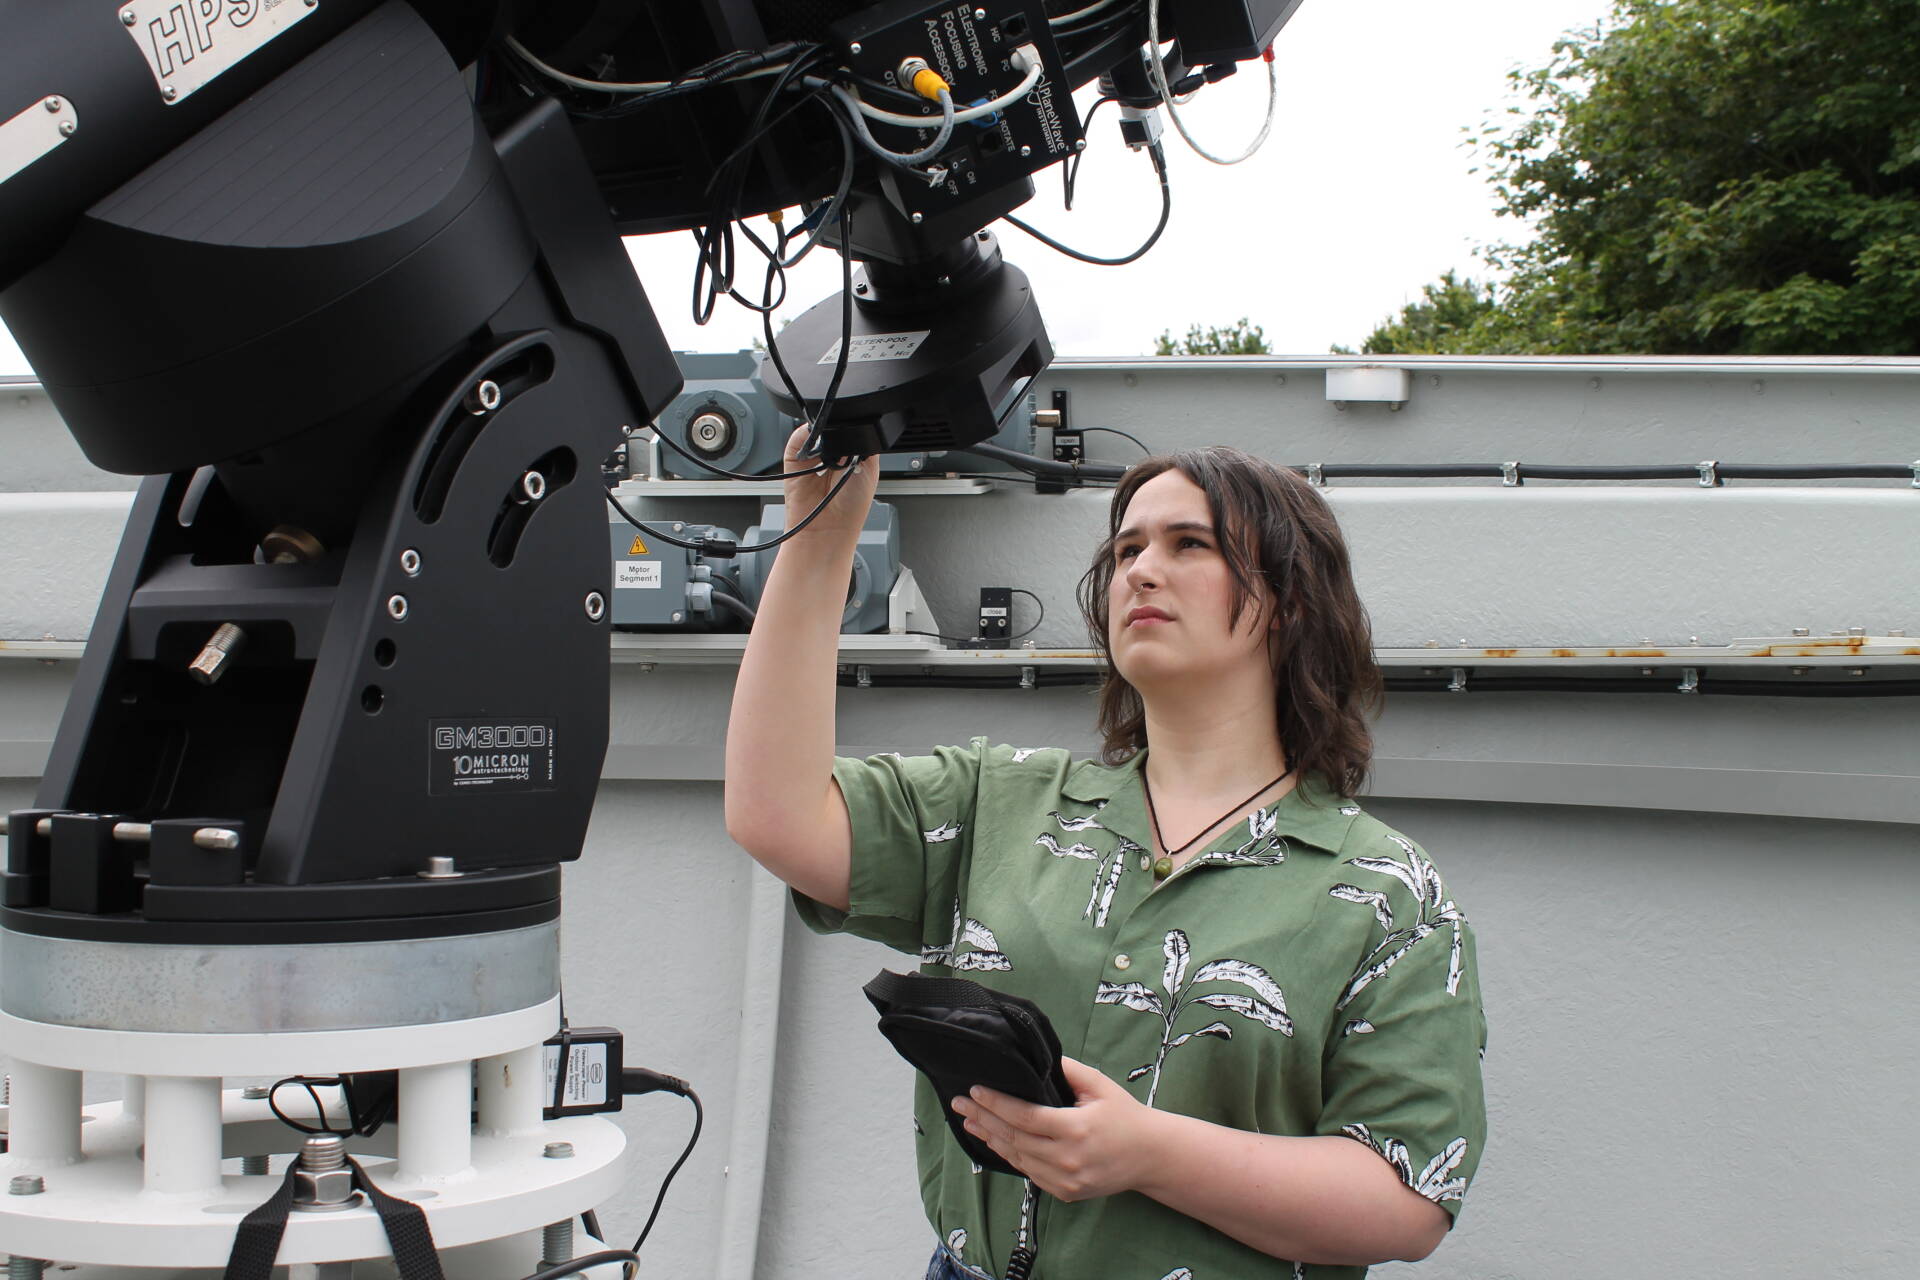 PhD student Carys working in the observatory